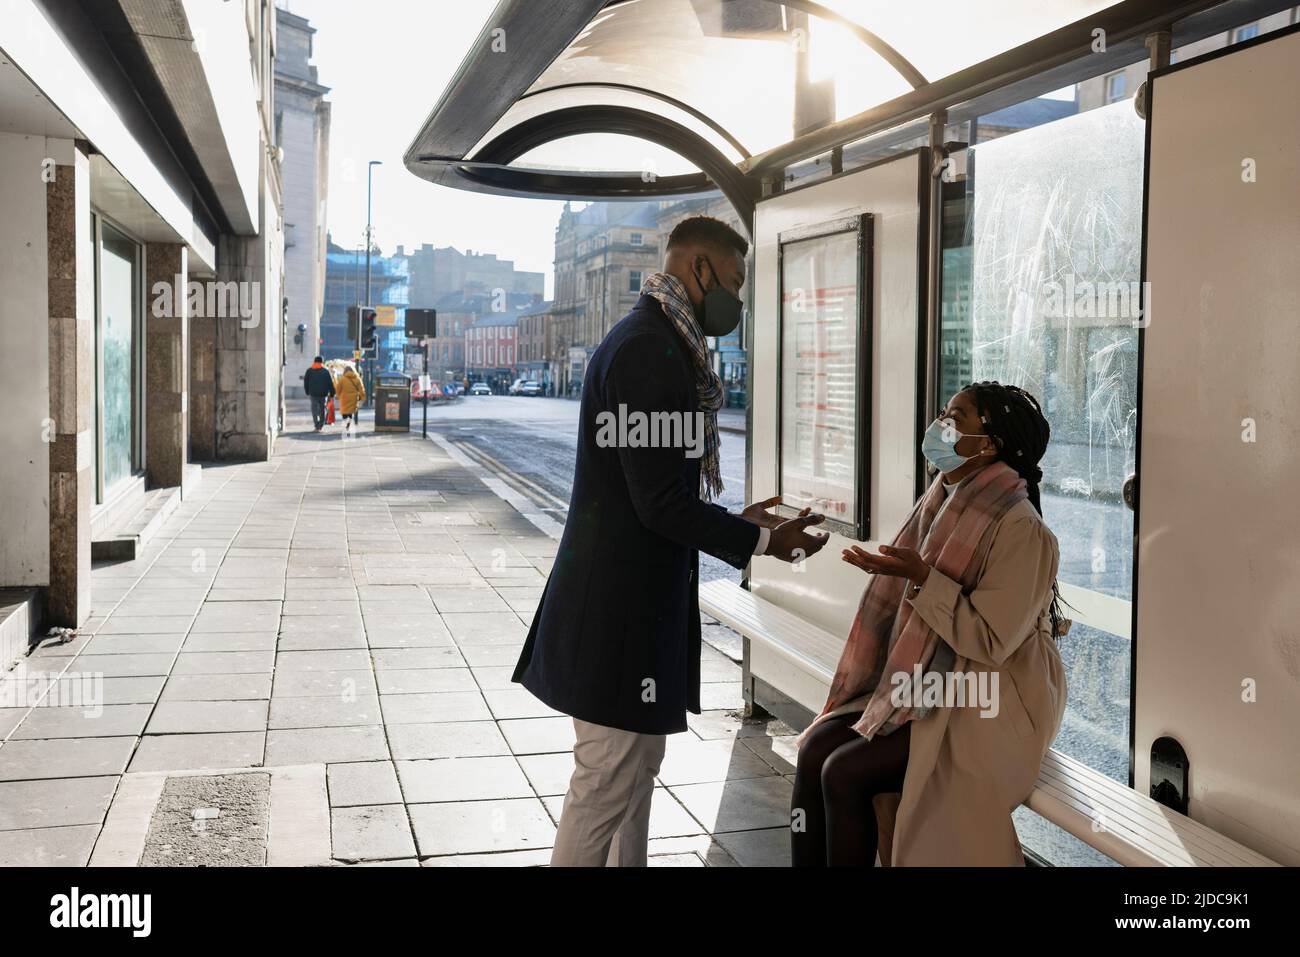 Two people wearing face coverings waiting for bus and having conversation, gesticulating with hands Stock Photo